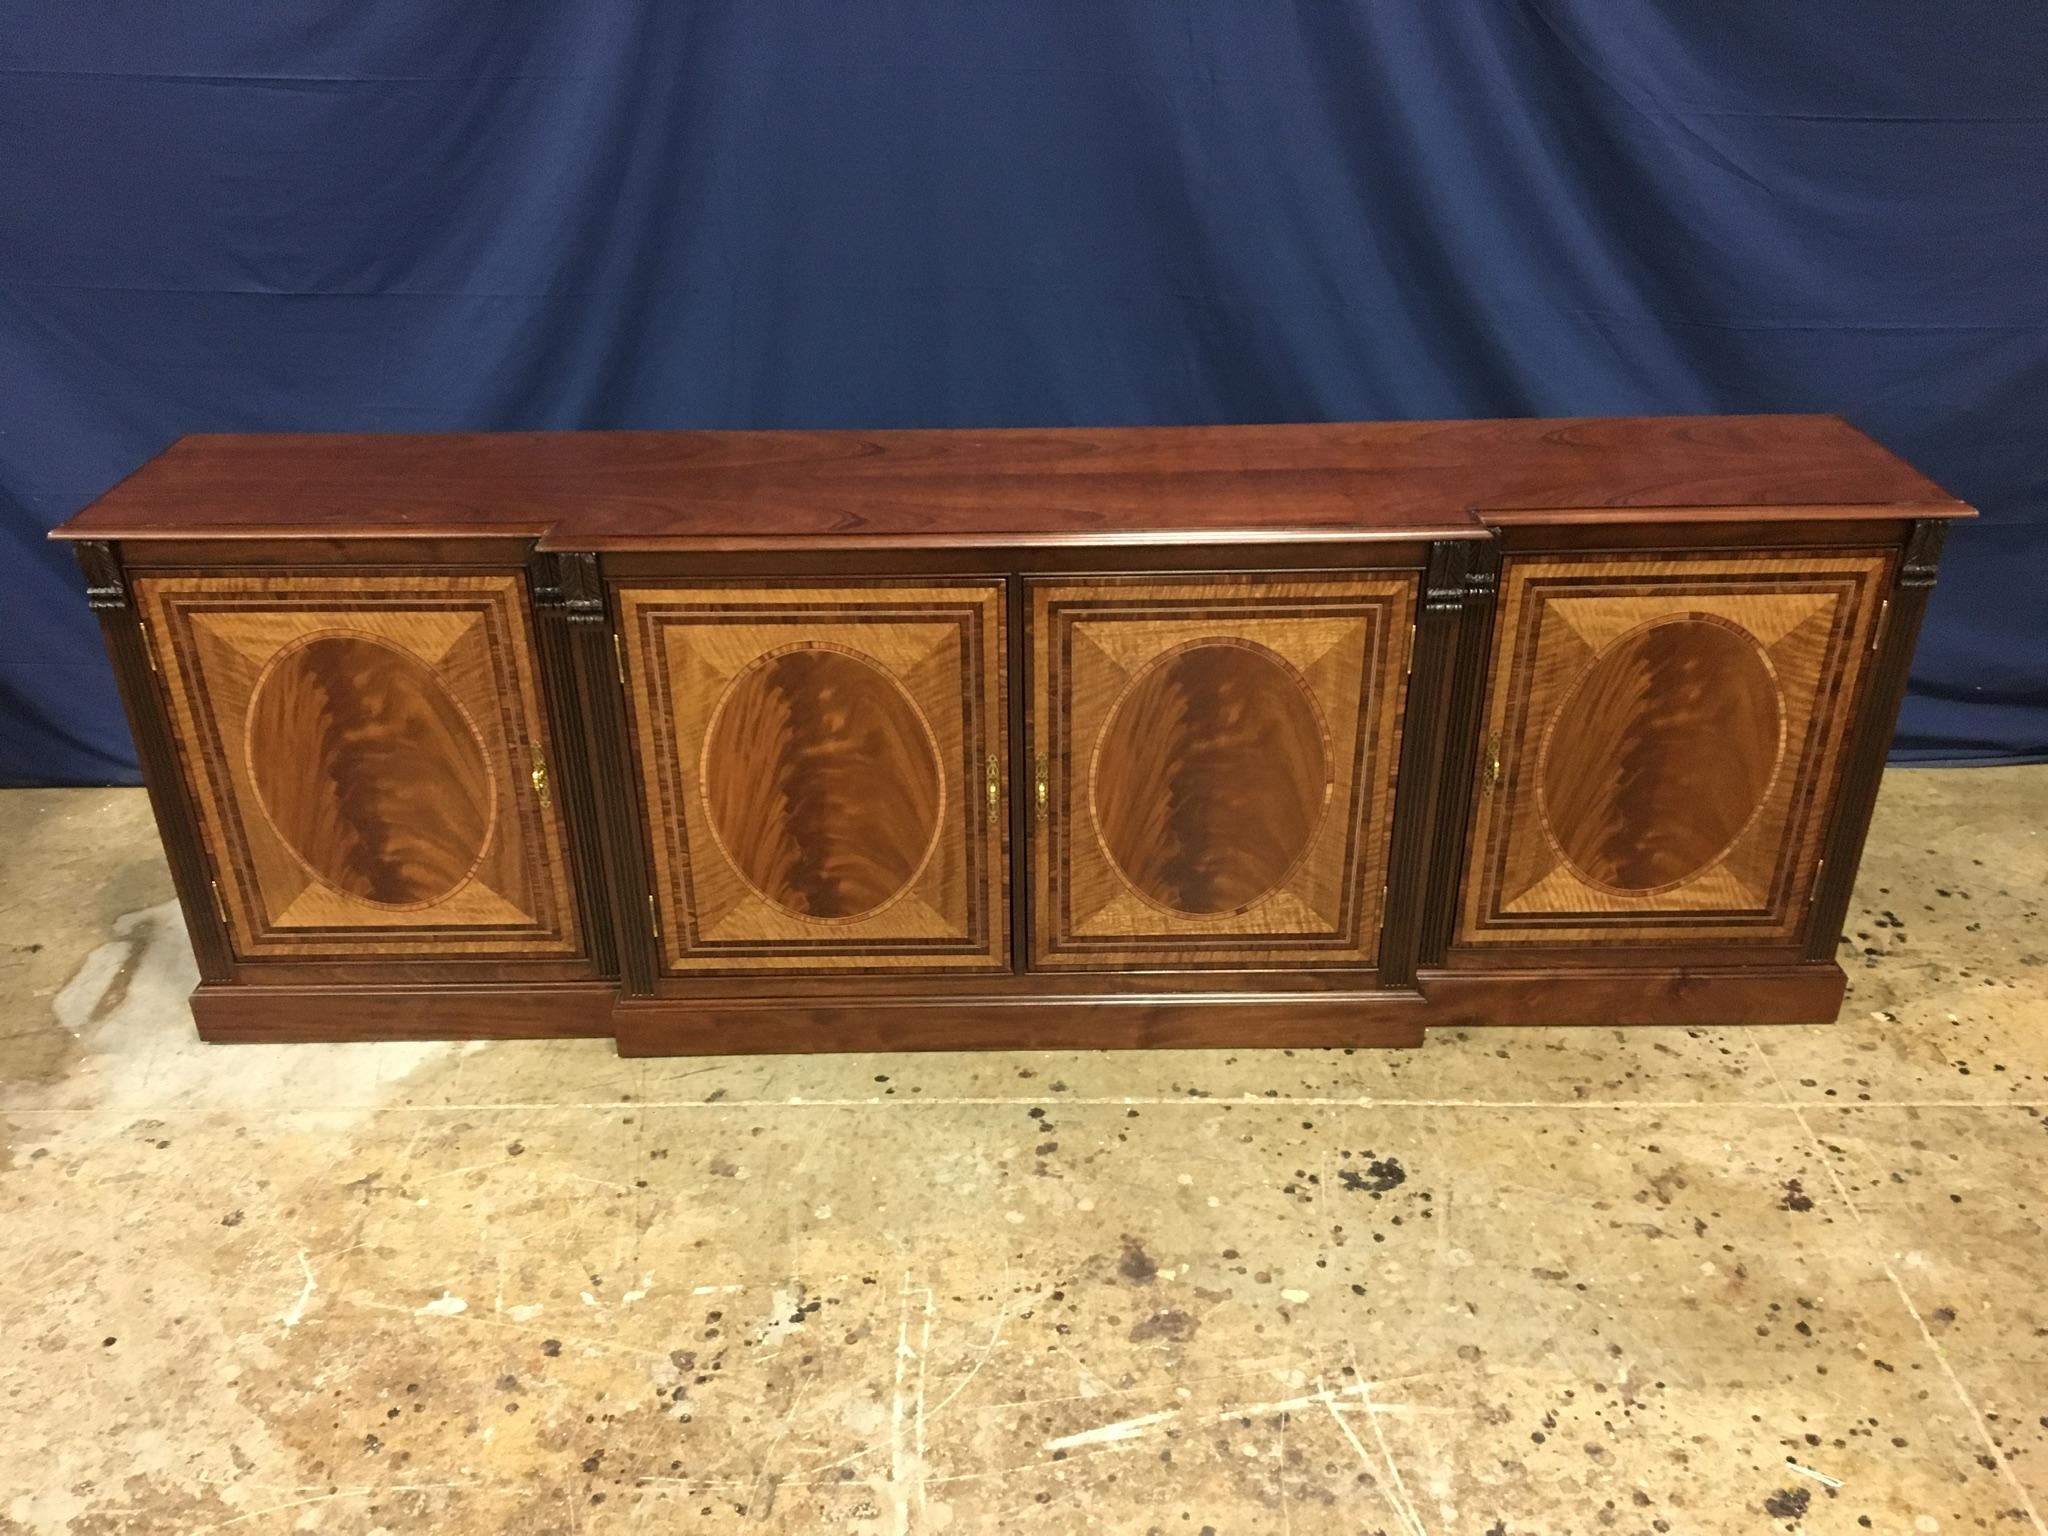 This is made-to-order traditional mahogany four door buffet or credenza made in the Leighton Hall shop. It features four doors with swirly crotch mahogany fields and satinwood and Santos rosewood borders. It has a cathedral mahogany top with a